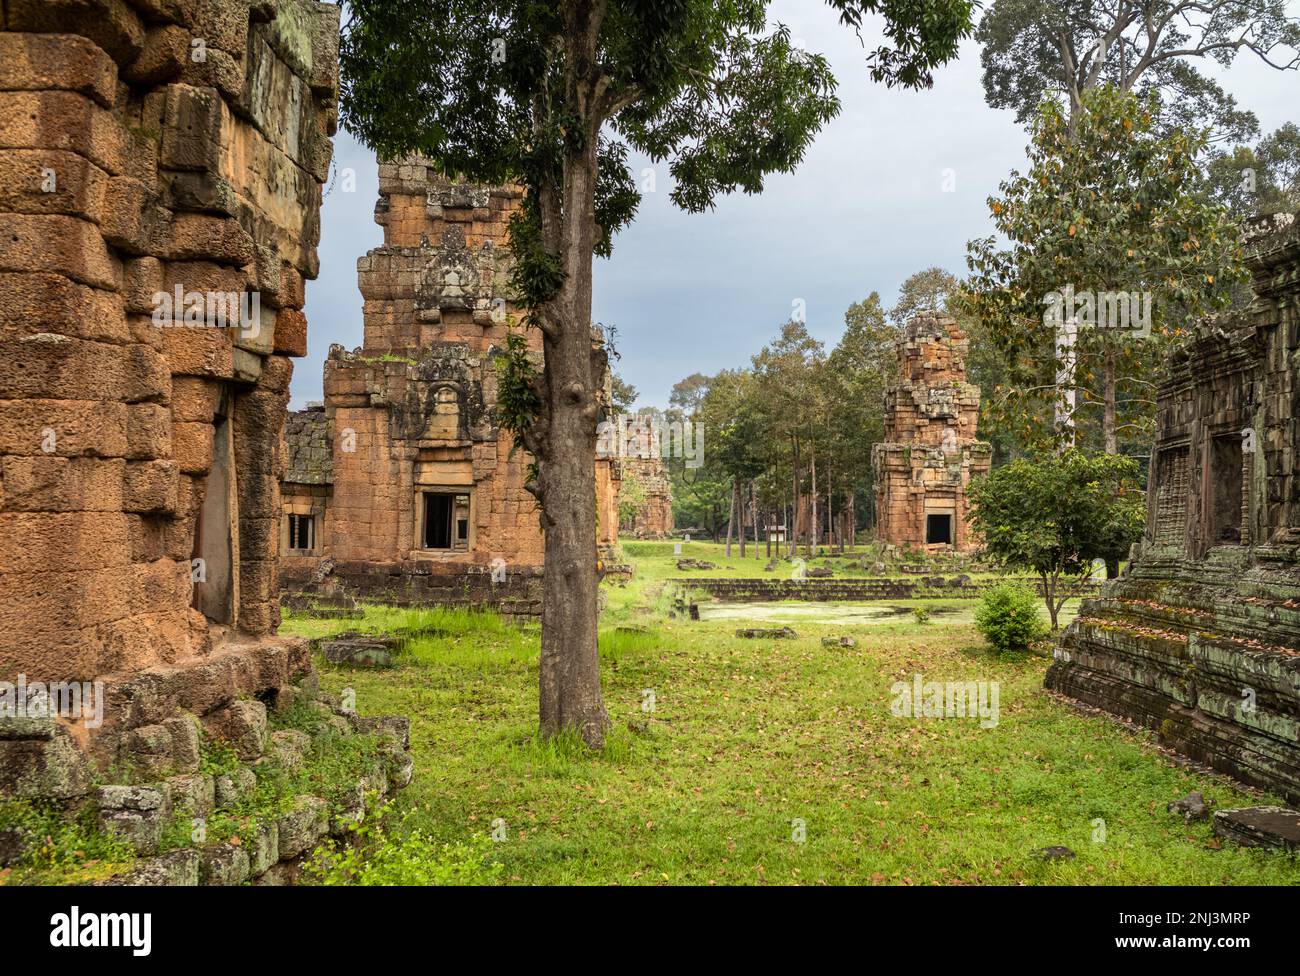 The rear of the 12th century Prasat Suor Prat towers next to a Khleangs, or storeroom, opposite the Elephant Terrace within Angkor Thom in Cambodia. Stock Photo